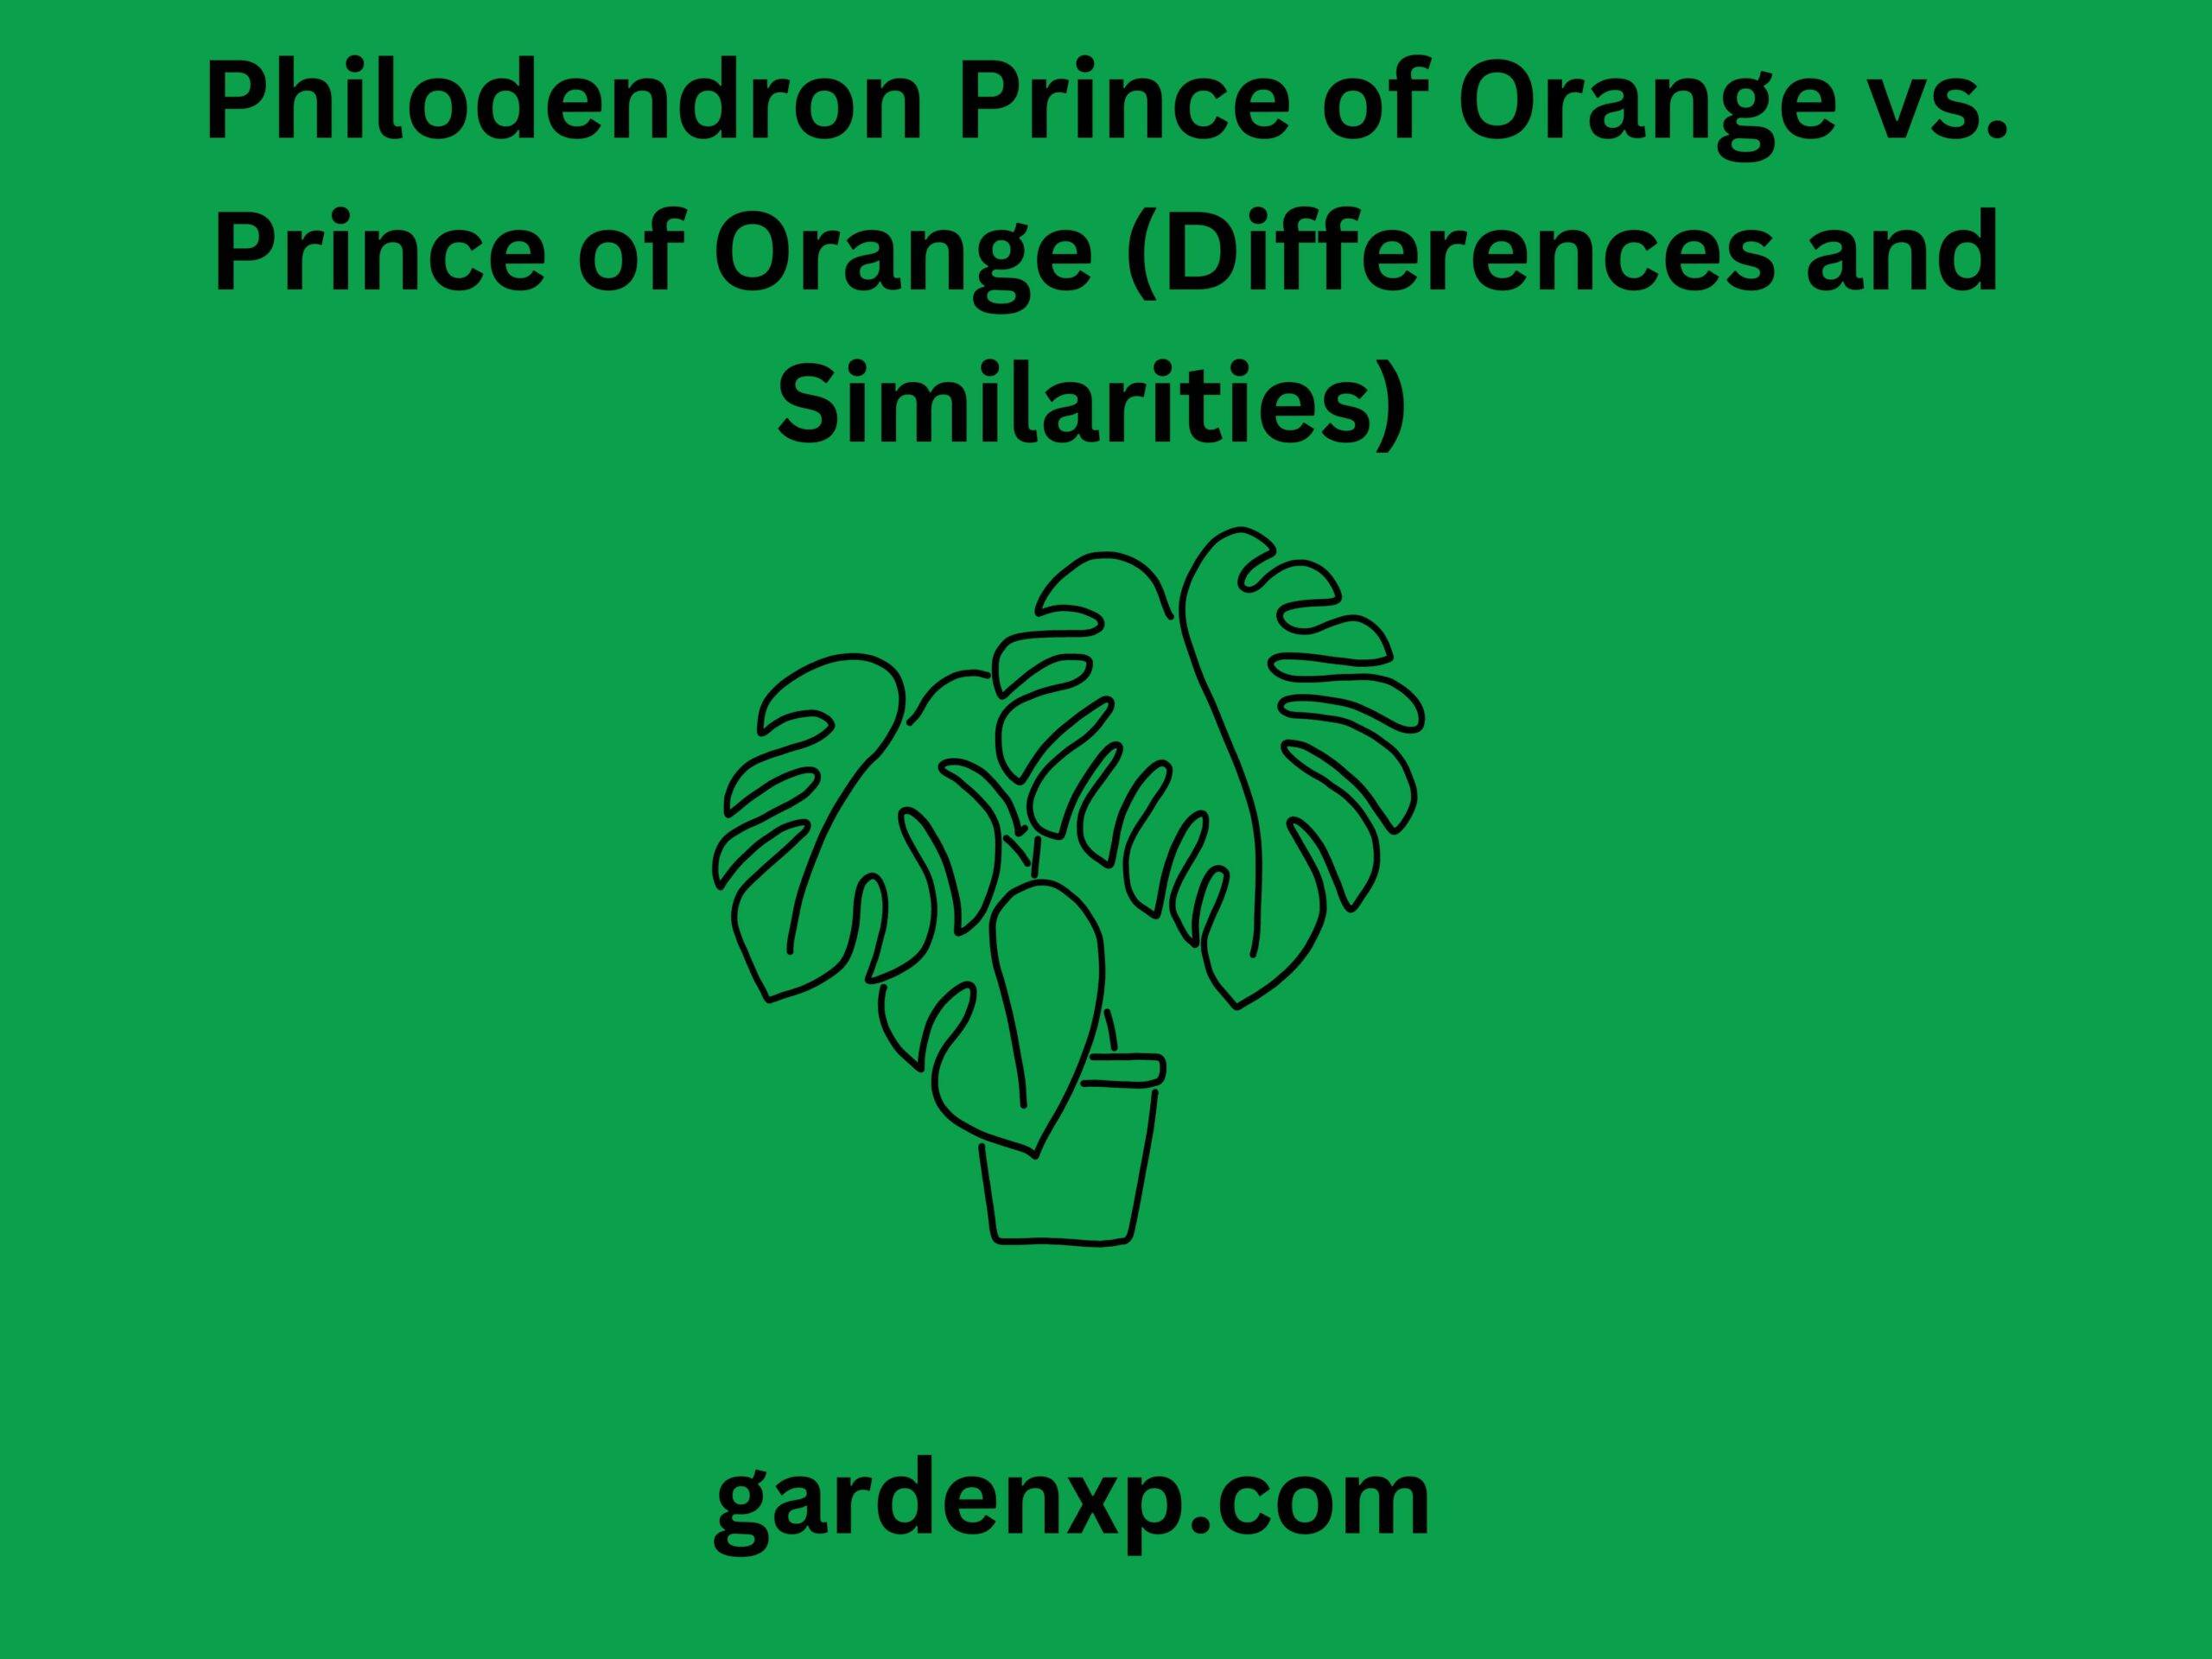 Philodendron Prince of Orange vs. Prince of Orange (Differences and Similarities)